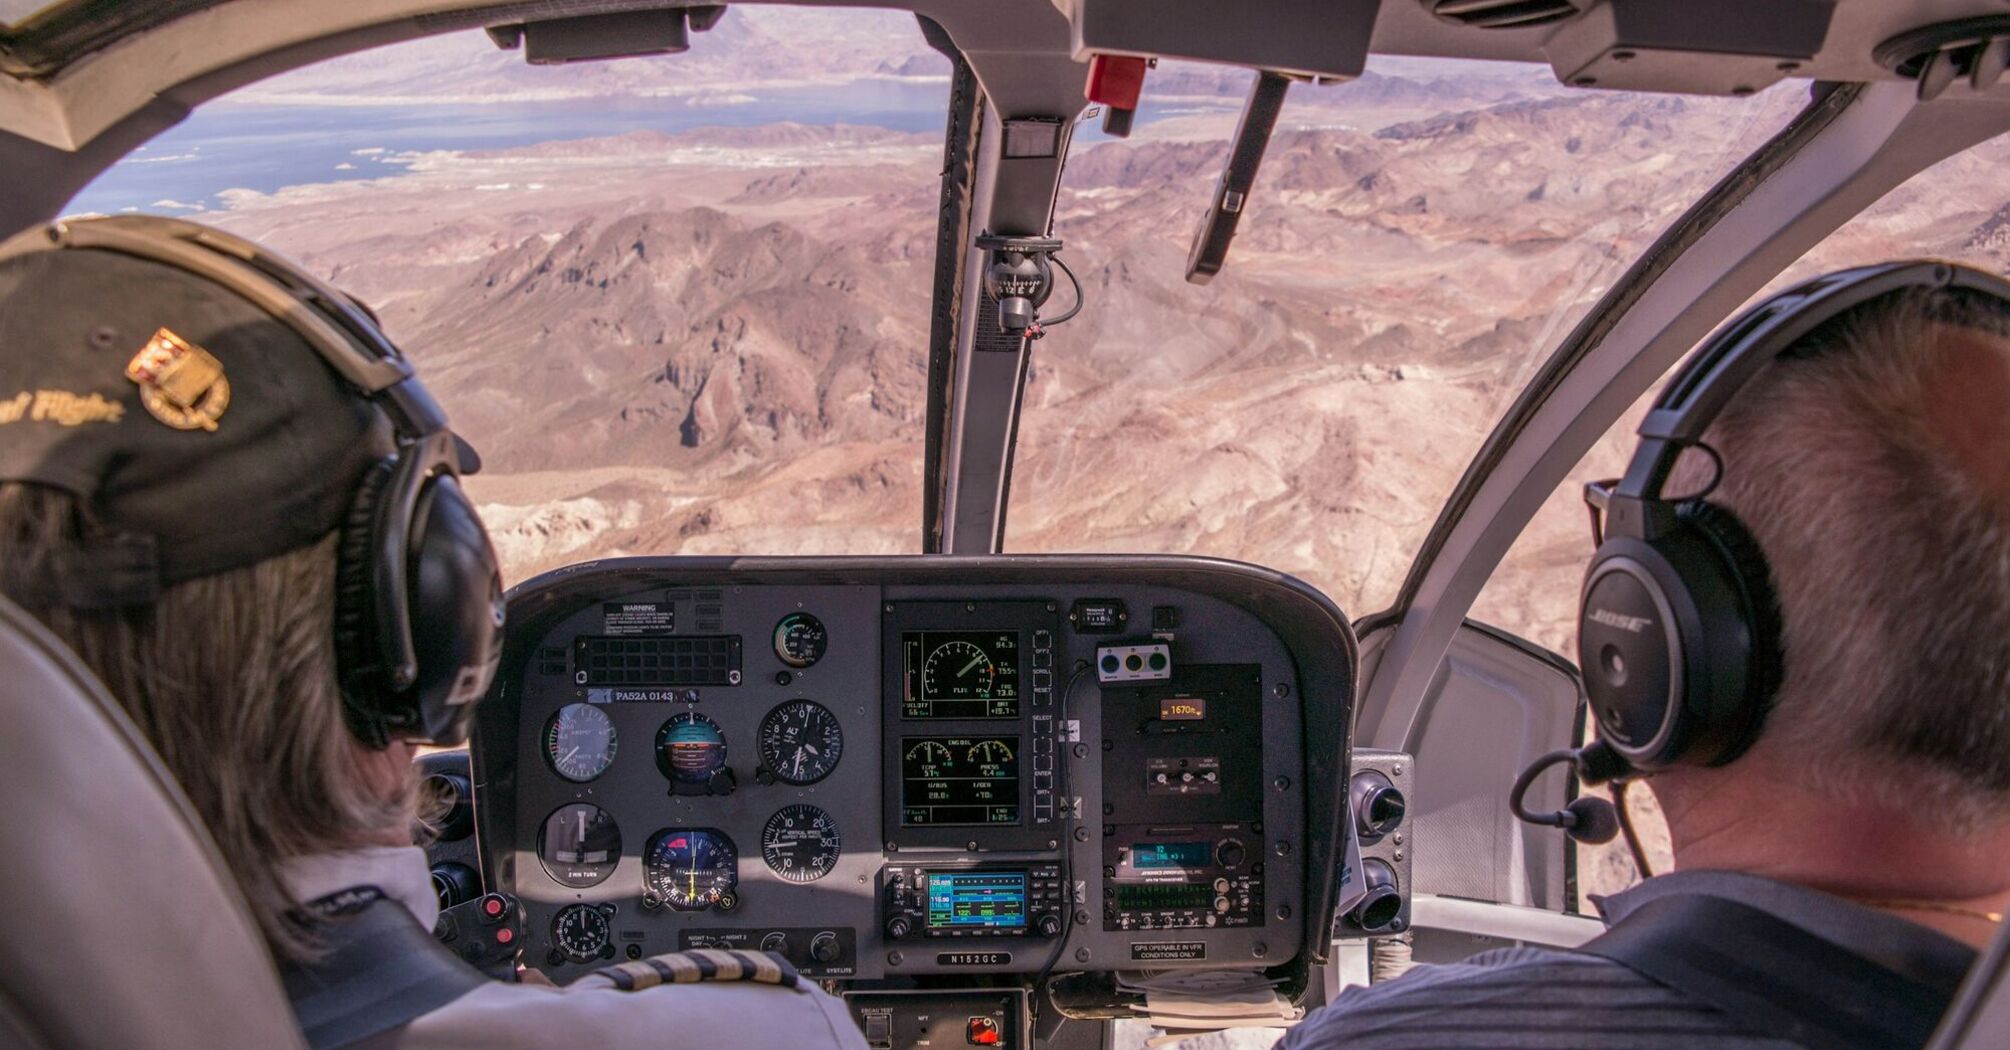 Two pilots control an airplane, view from the cockpit to the mountainous landscape beyond